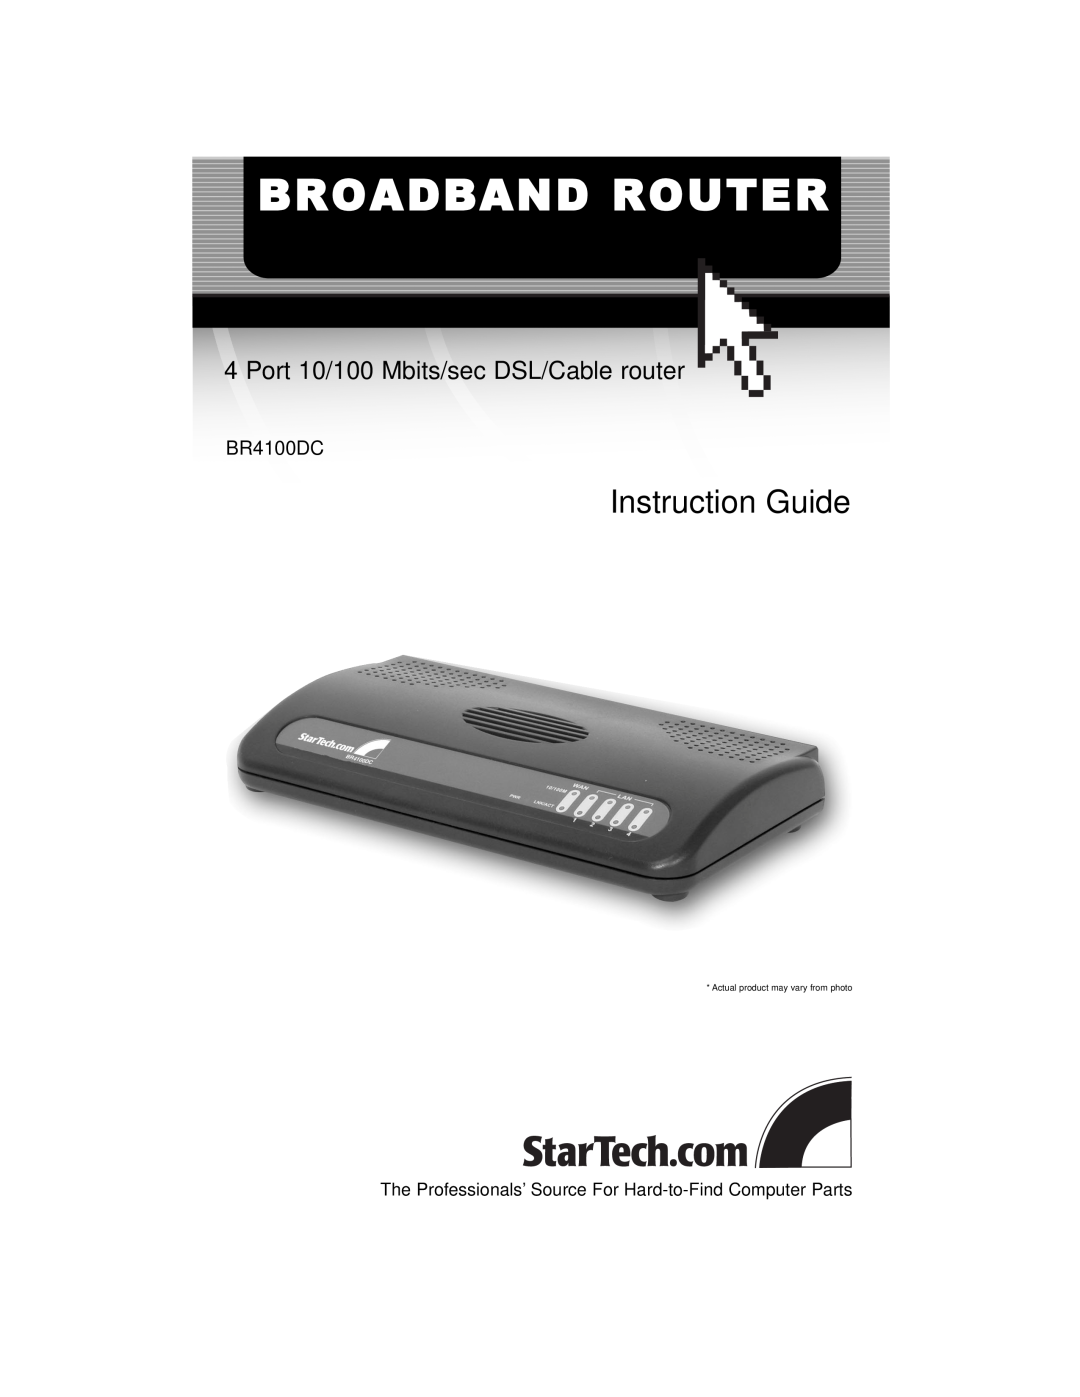 Star Tech Development BR4100DC manual Broadband Router, Instruction Guide, Port 10/100 Mbits/sec DSL/Cable router 